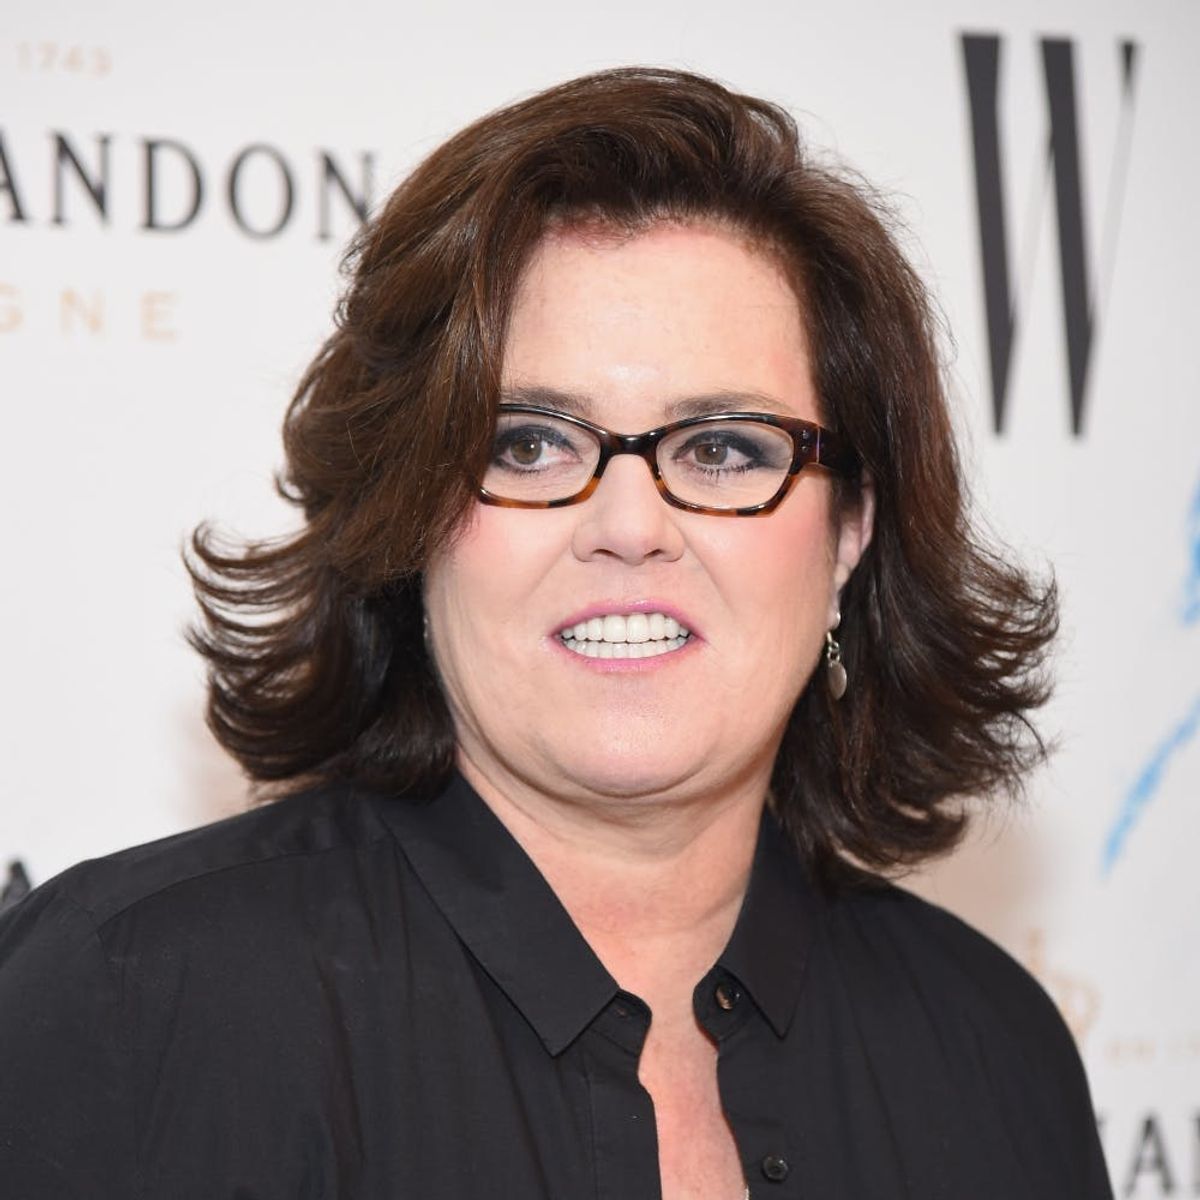 Rosie O’Donnell Is Planning to Lead an Anti-Trump Protest at the White House Tomorrow